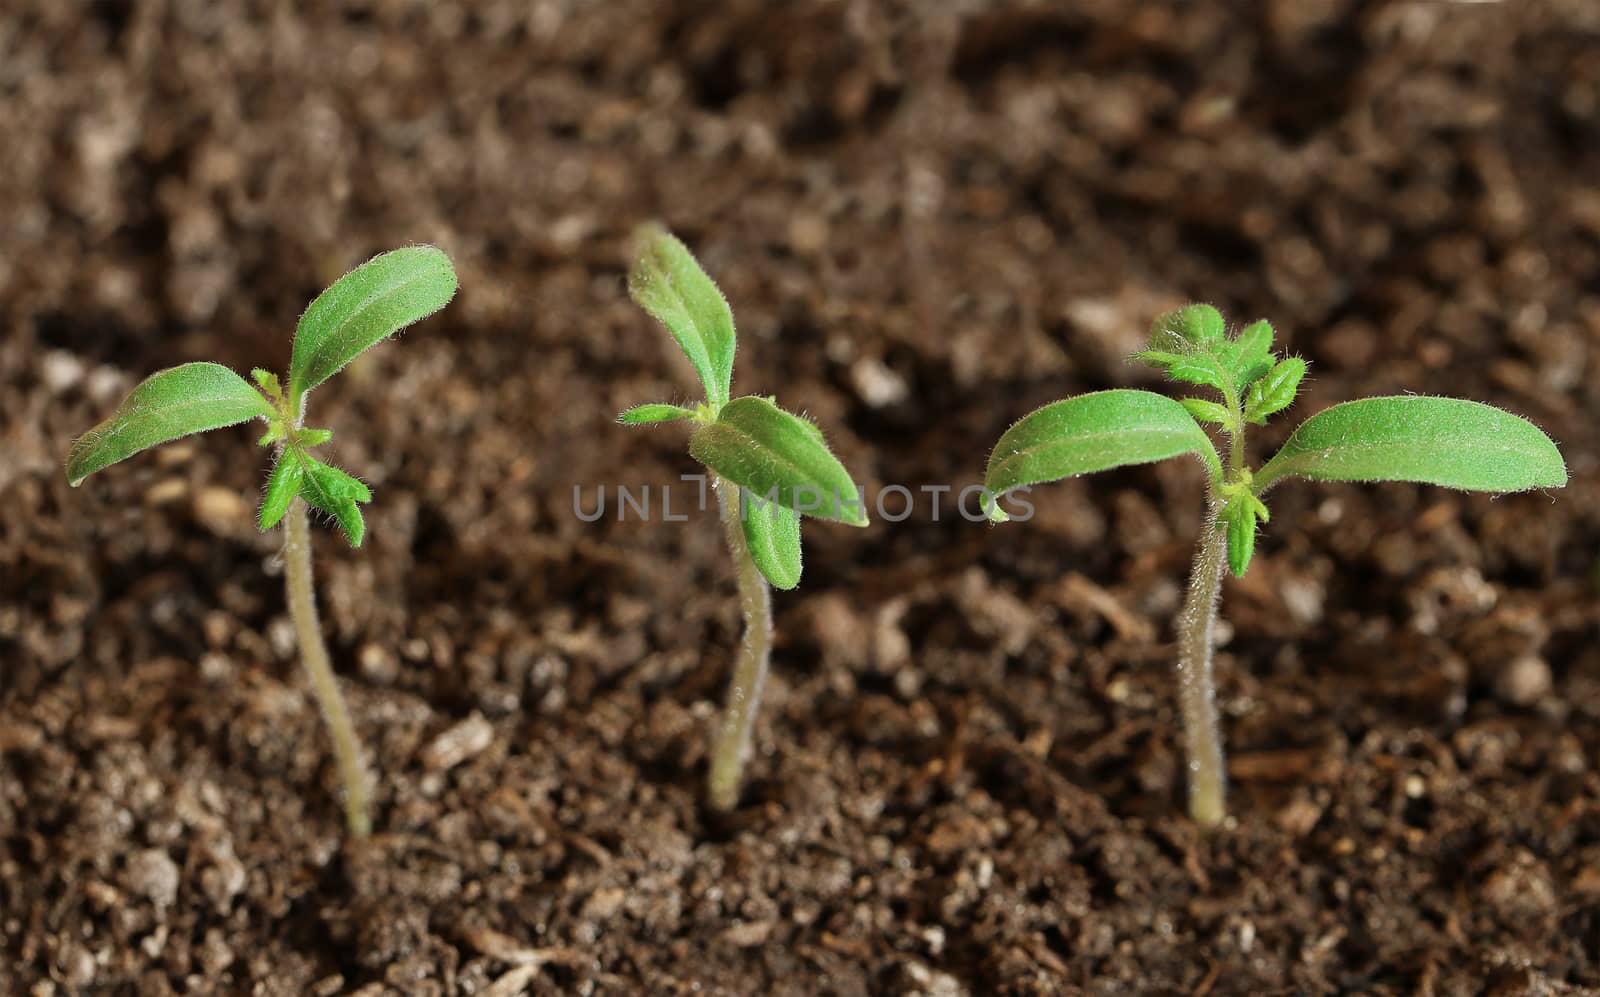 small green seedling in the ground